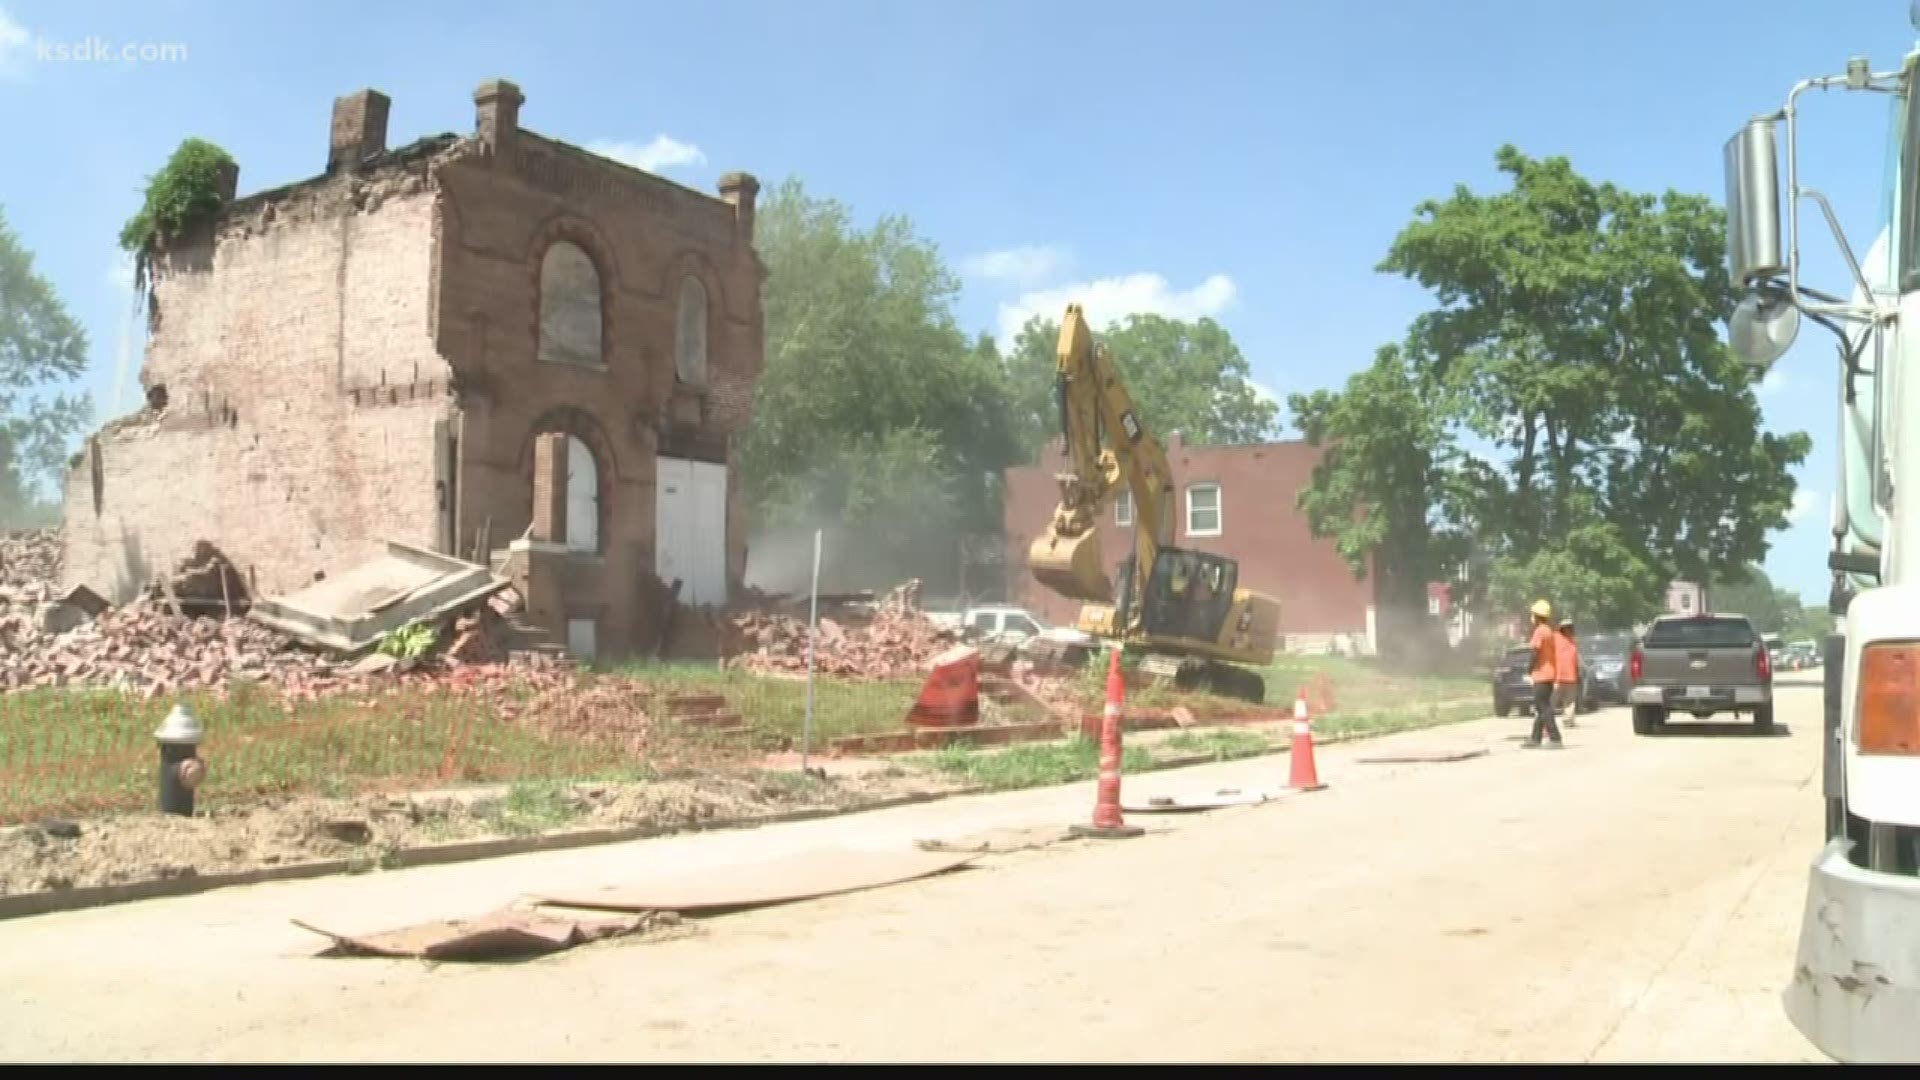 It's a part of the Blight Elimination project, which also plans to clean up 130 vacant lots for residents to enjoy.